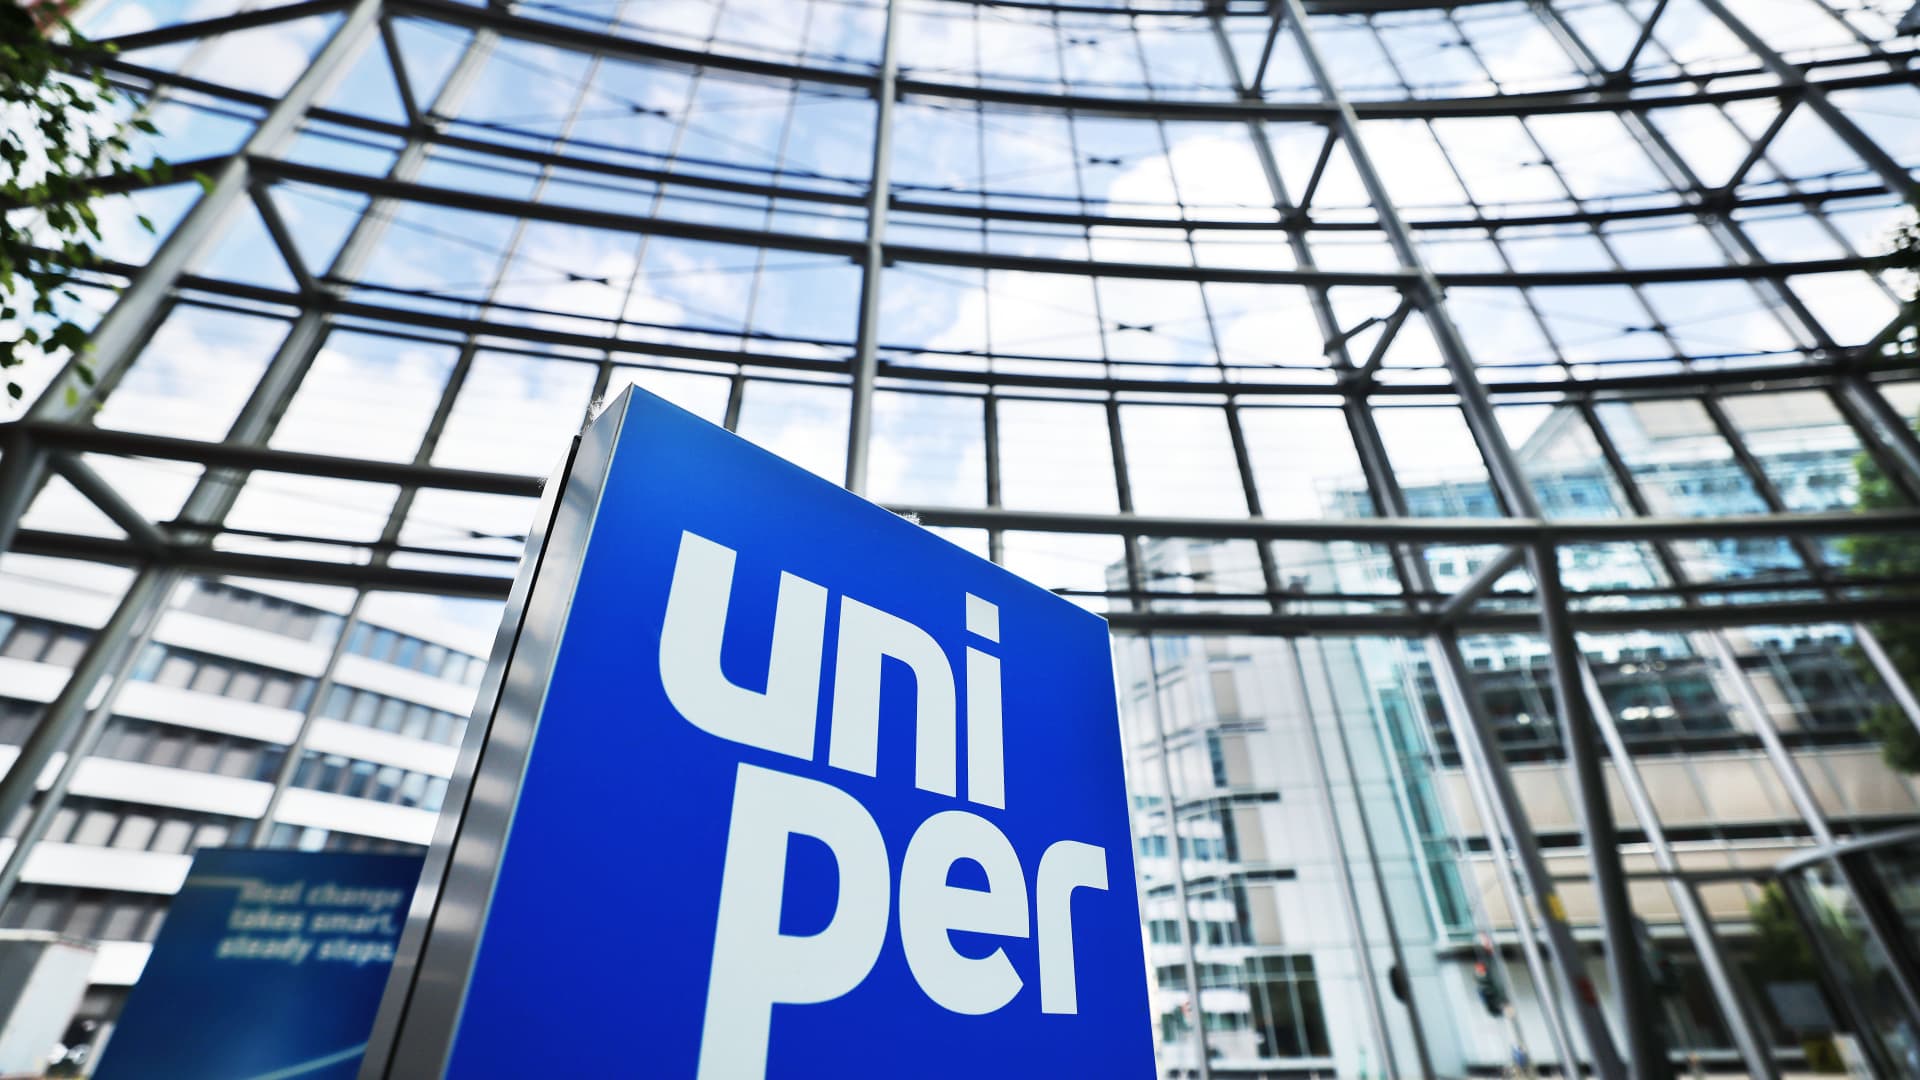 The German government accepts the nationalization agreement for the energy giant Uniper